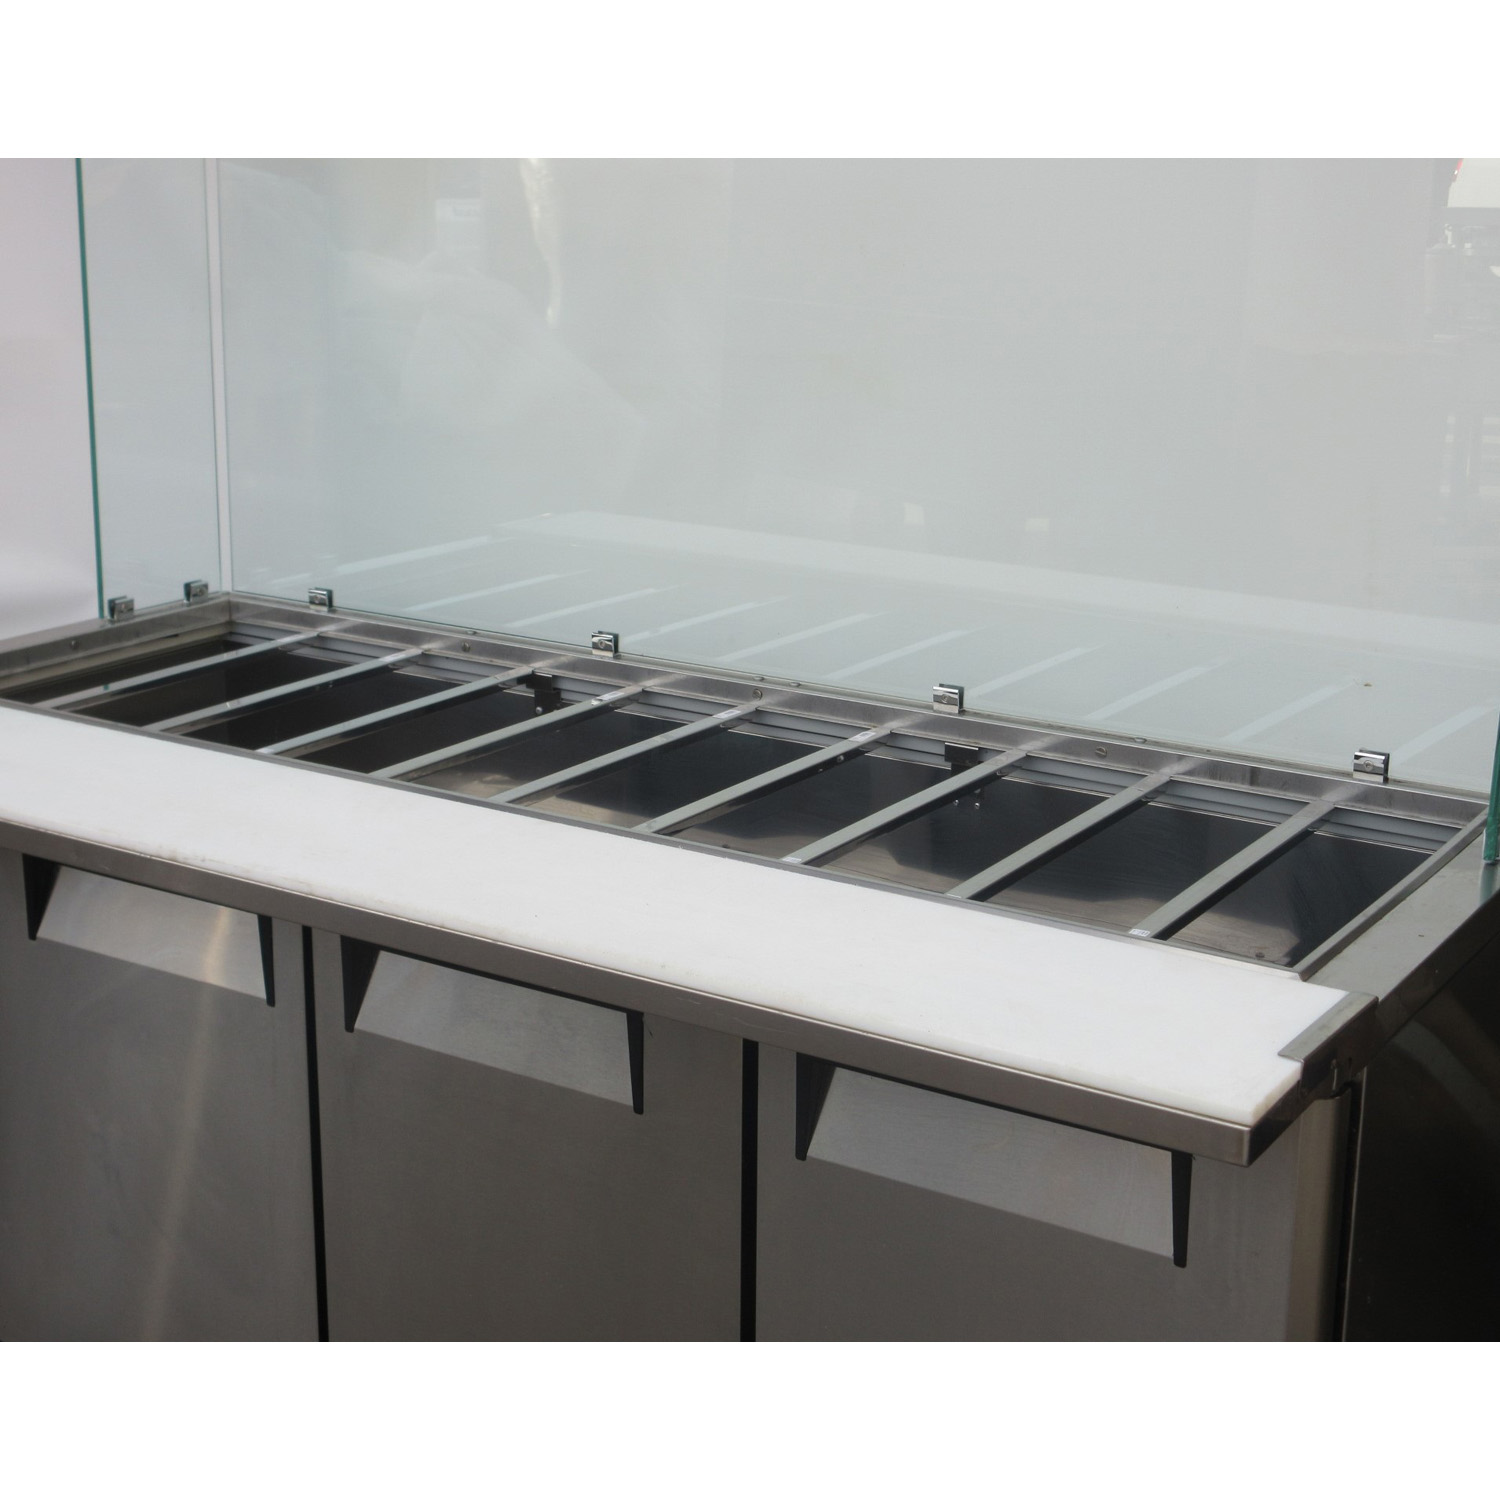 Turbo Air JBT-72-N 72'' Salad Bar W/Sneeze Guard, Used Excellent Condition image 2